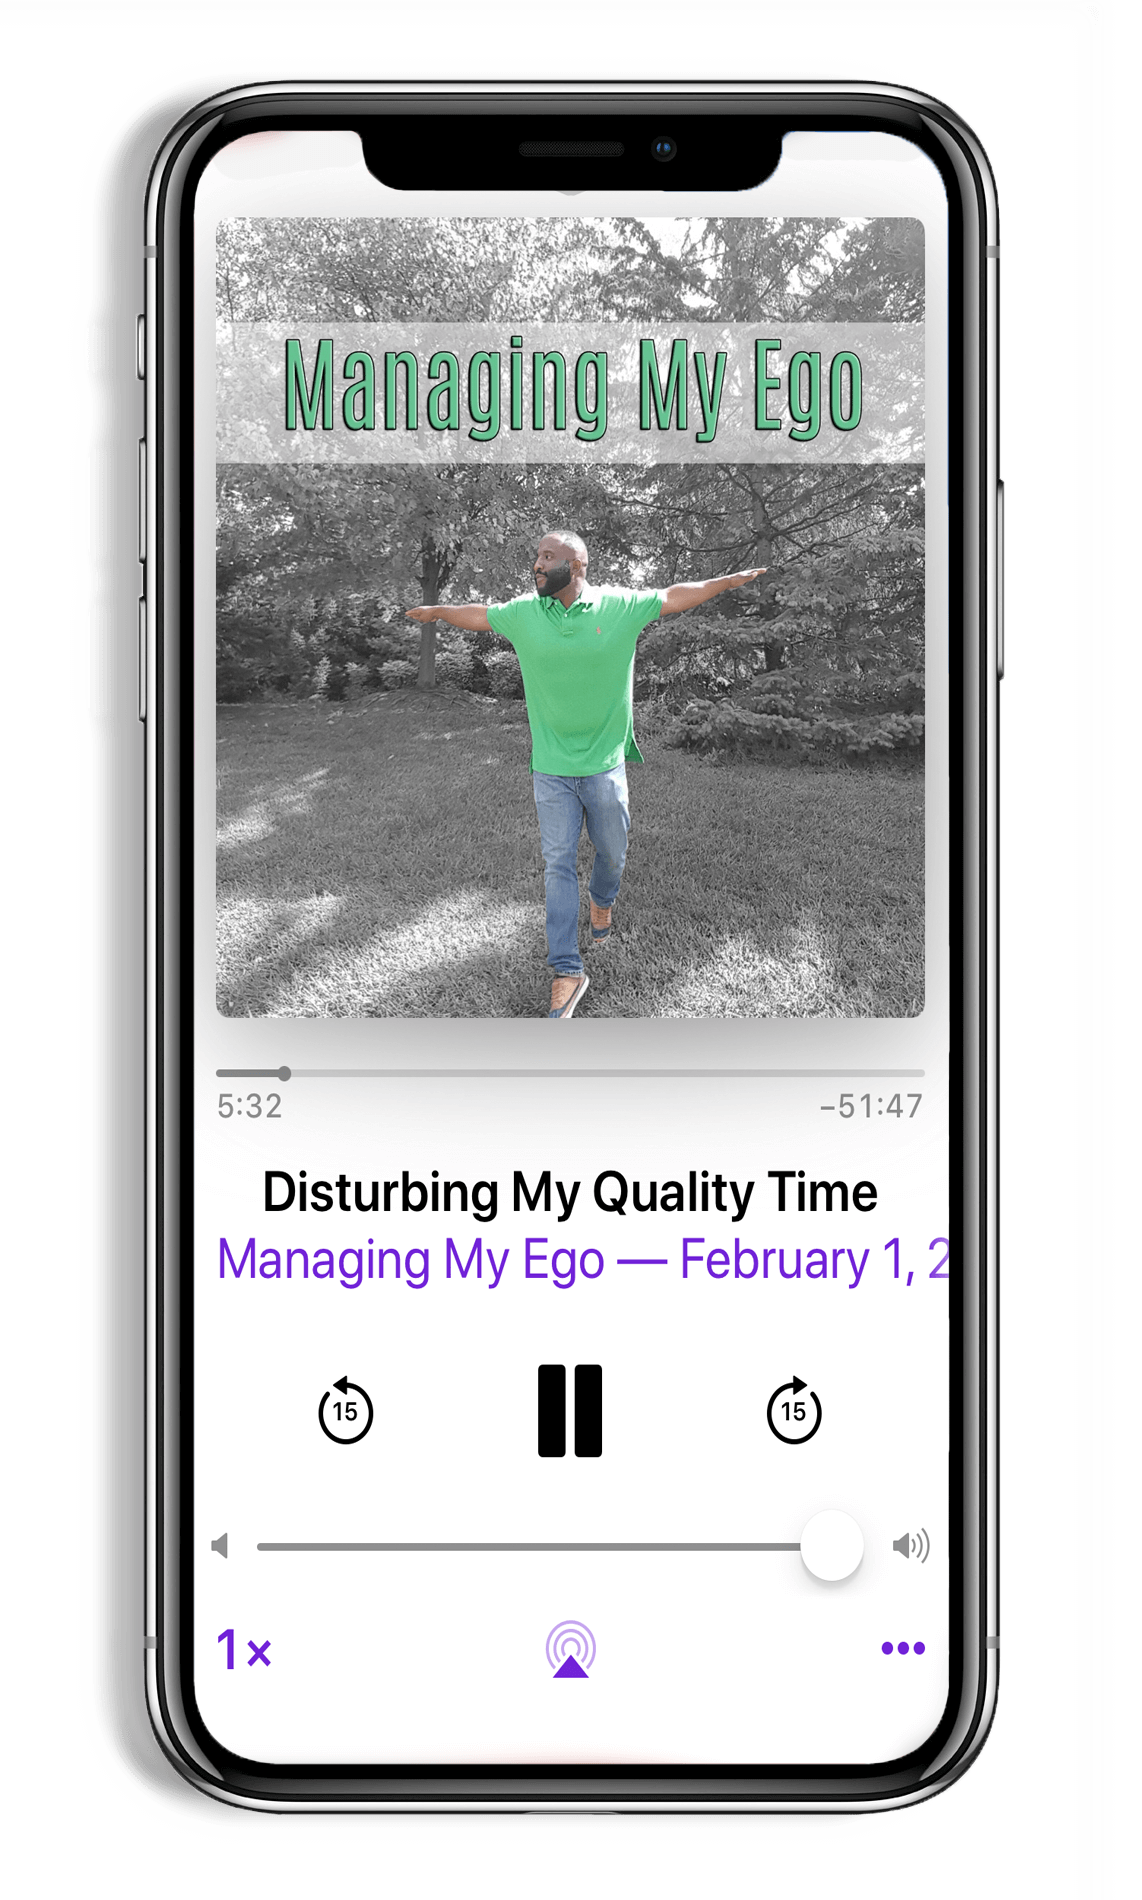 Managing My Ego on the iPhone X